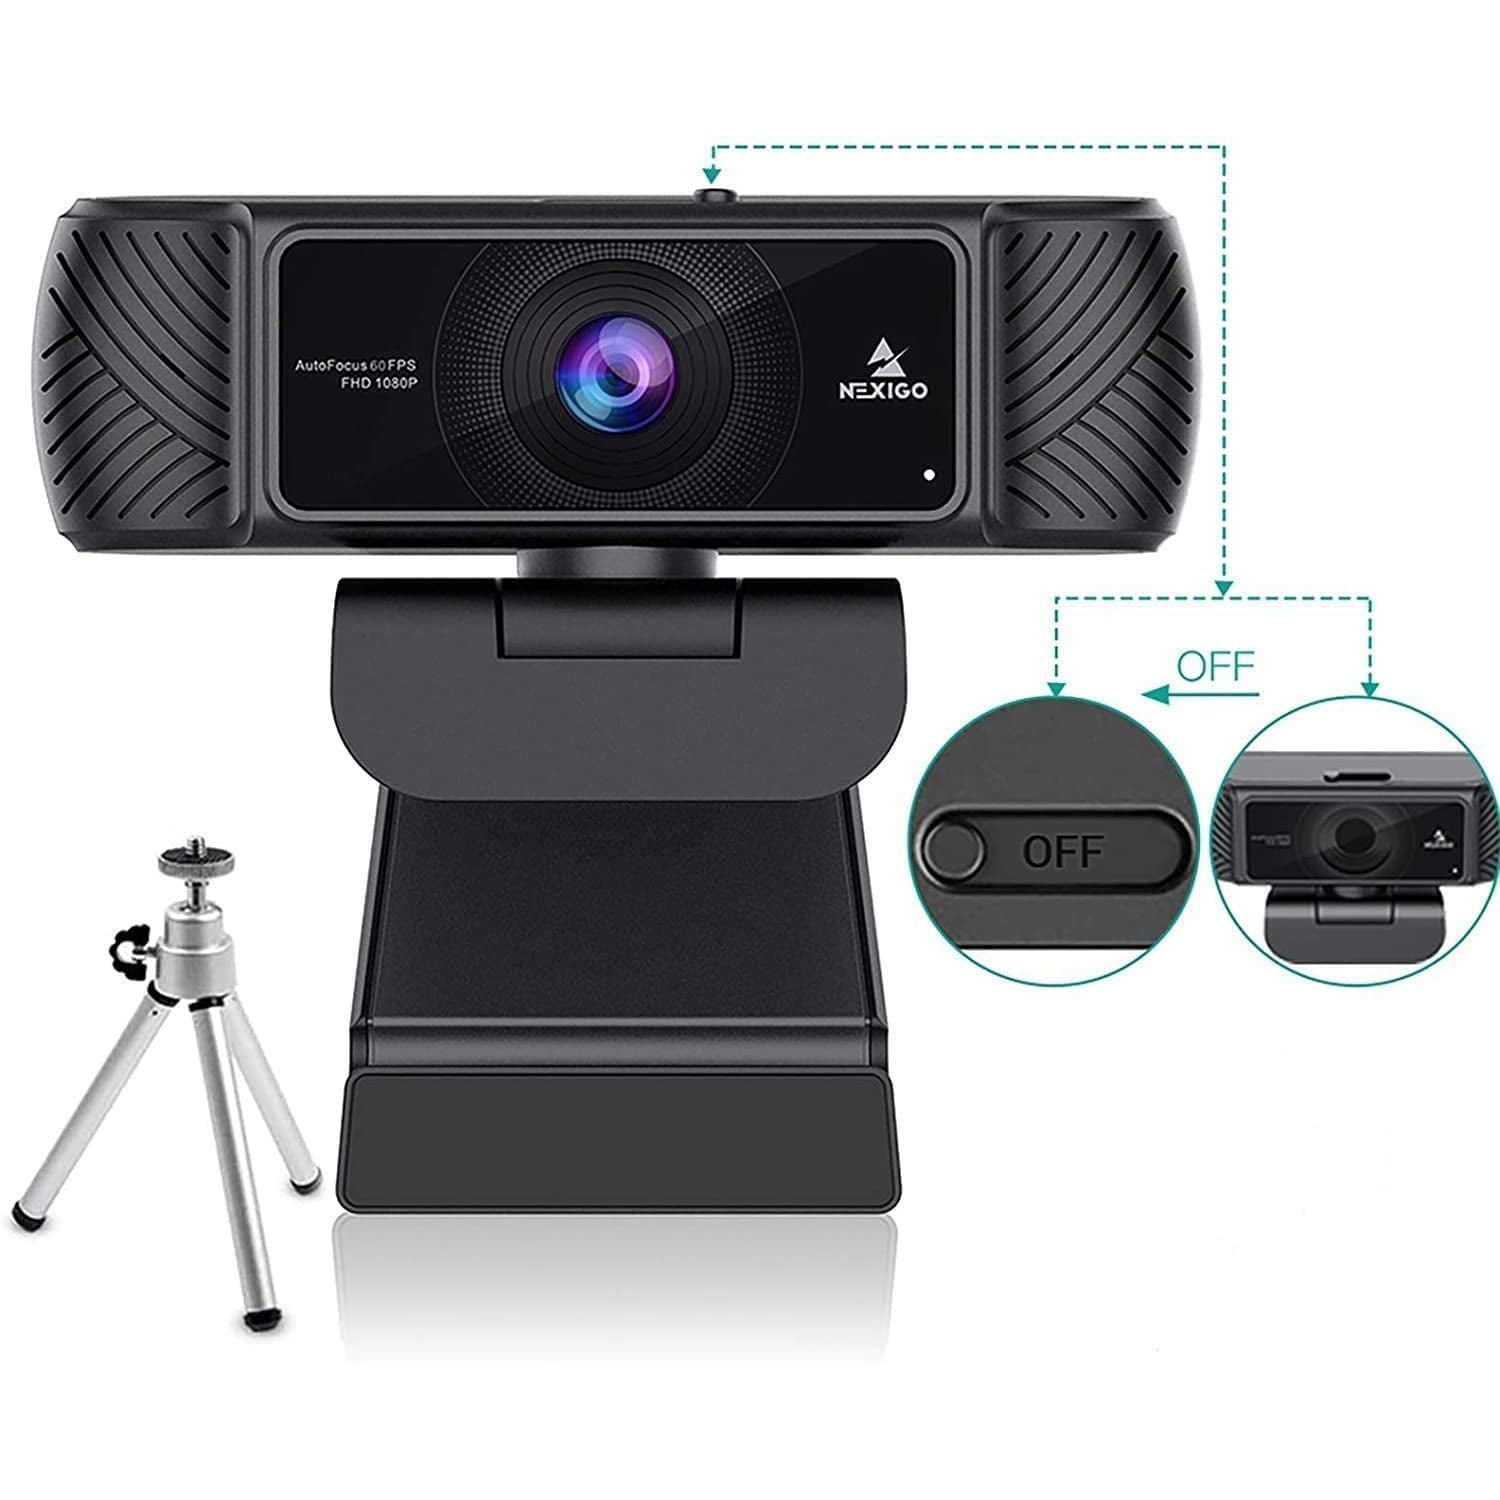 Webcam features a built-in manual privacy cover and comes with a tripod stand.